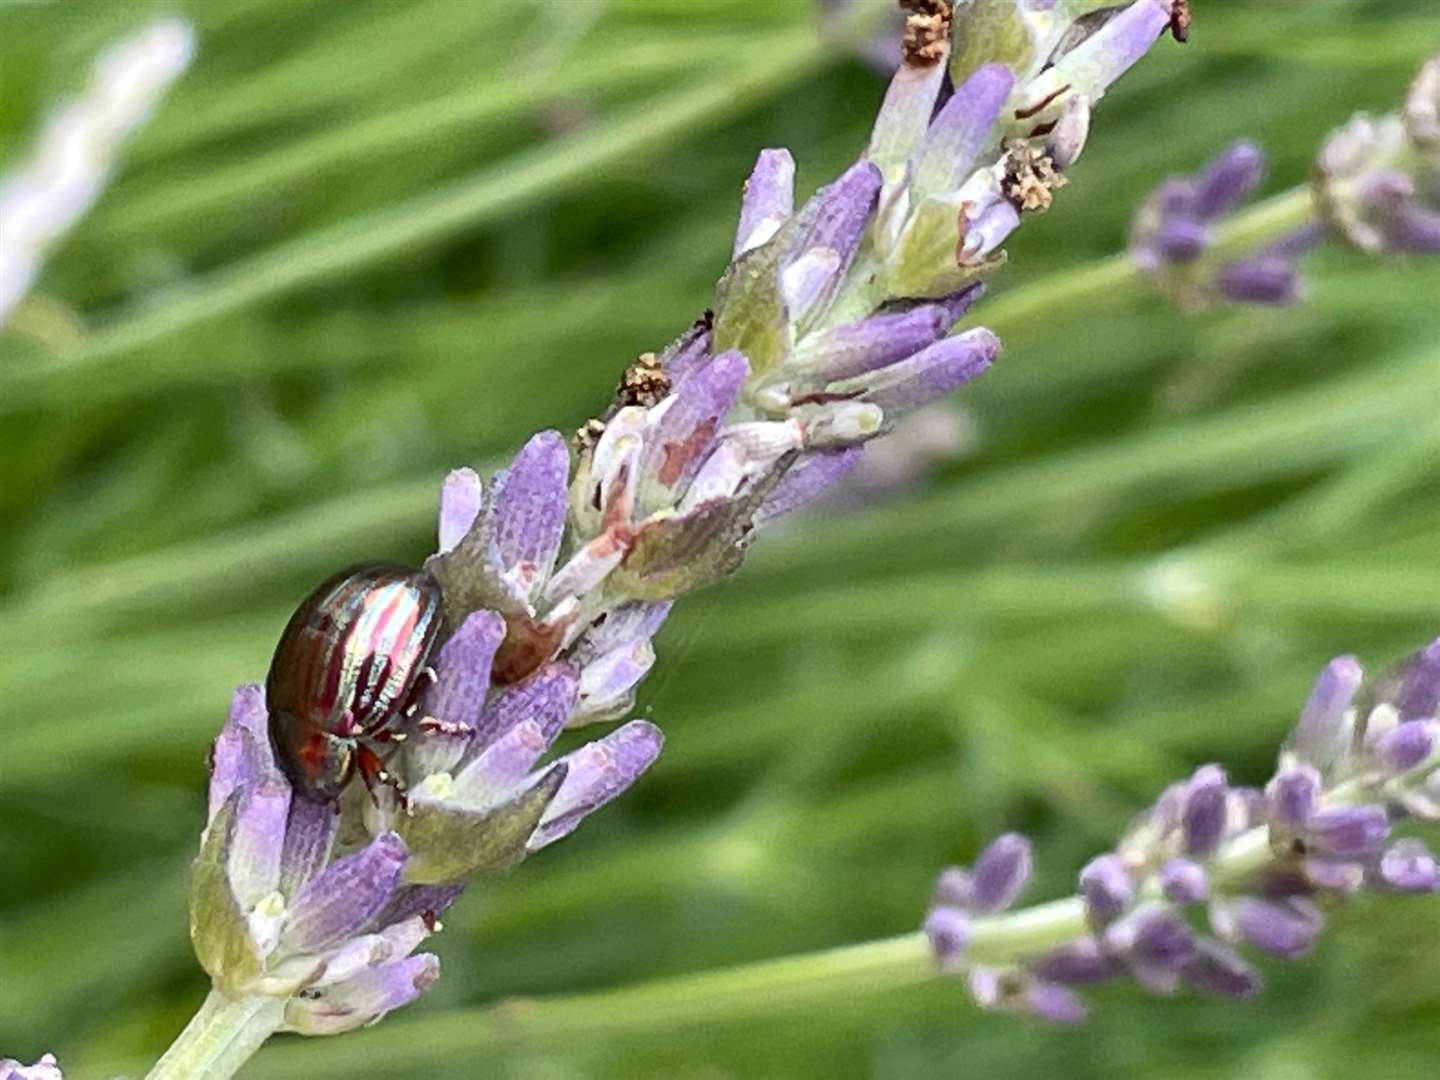 Rosemary beetles can be spotted in gardens throughout summer